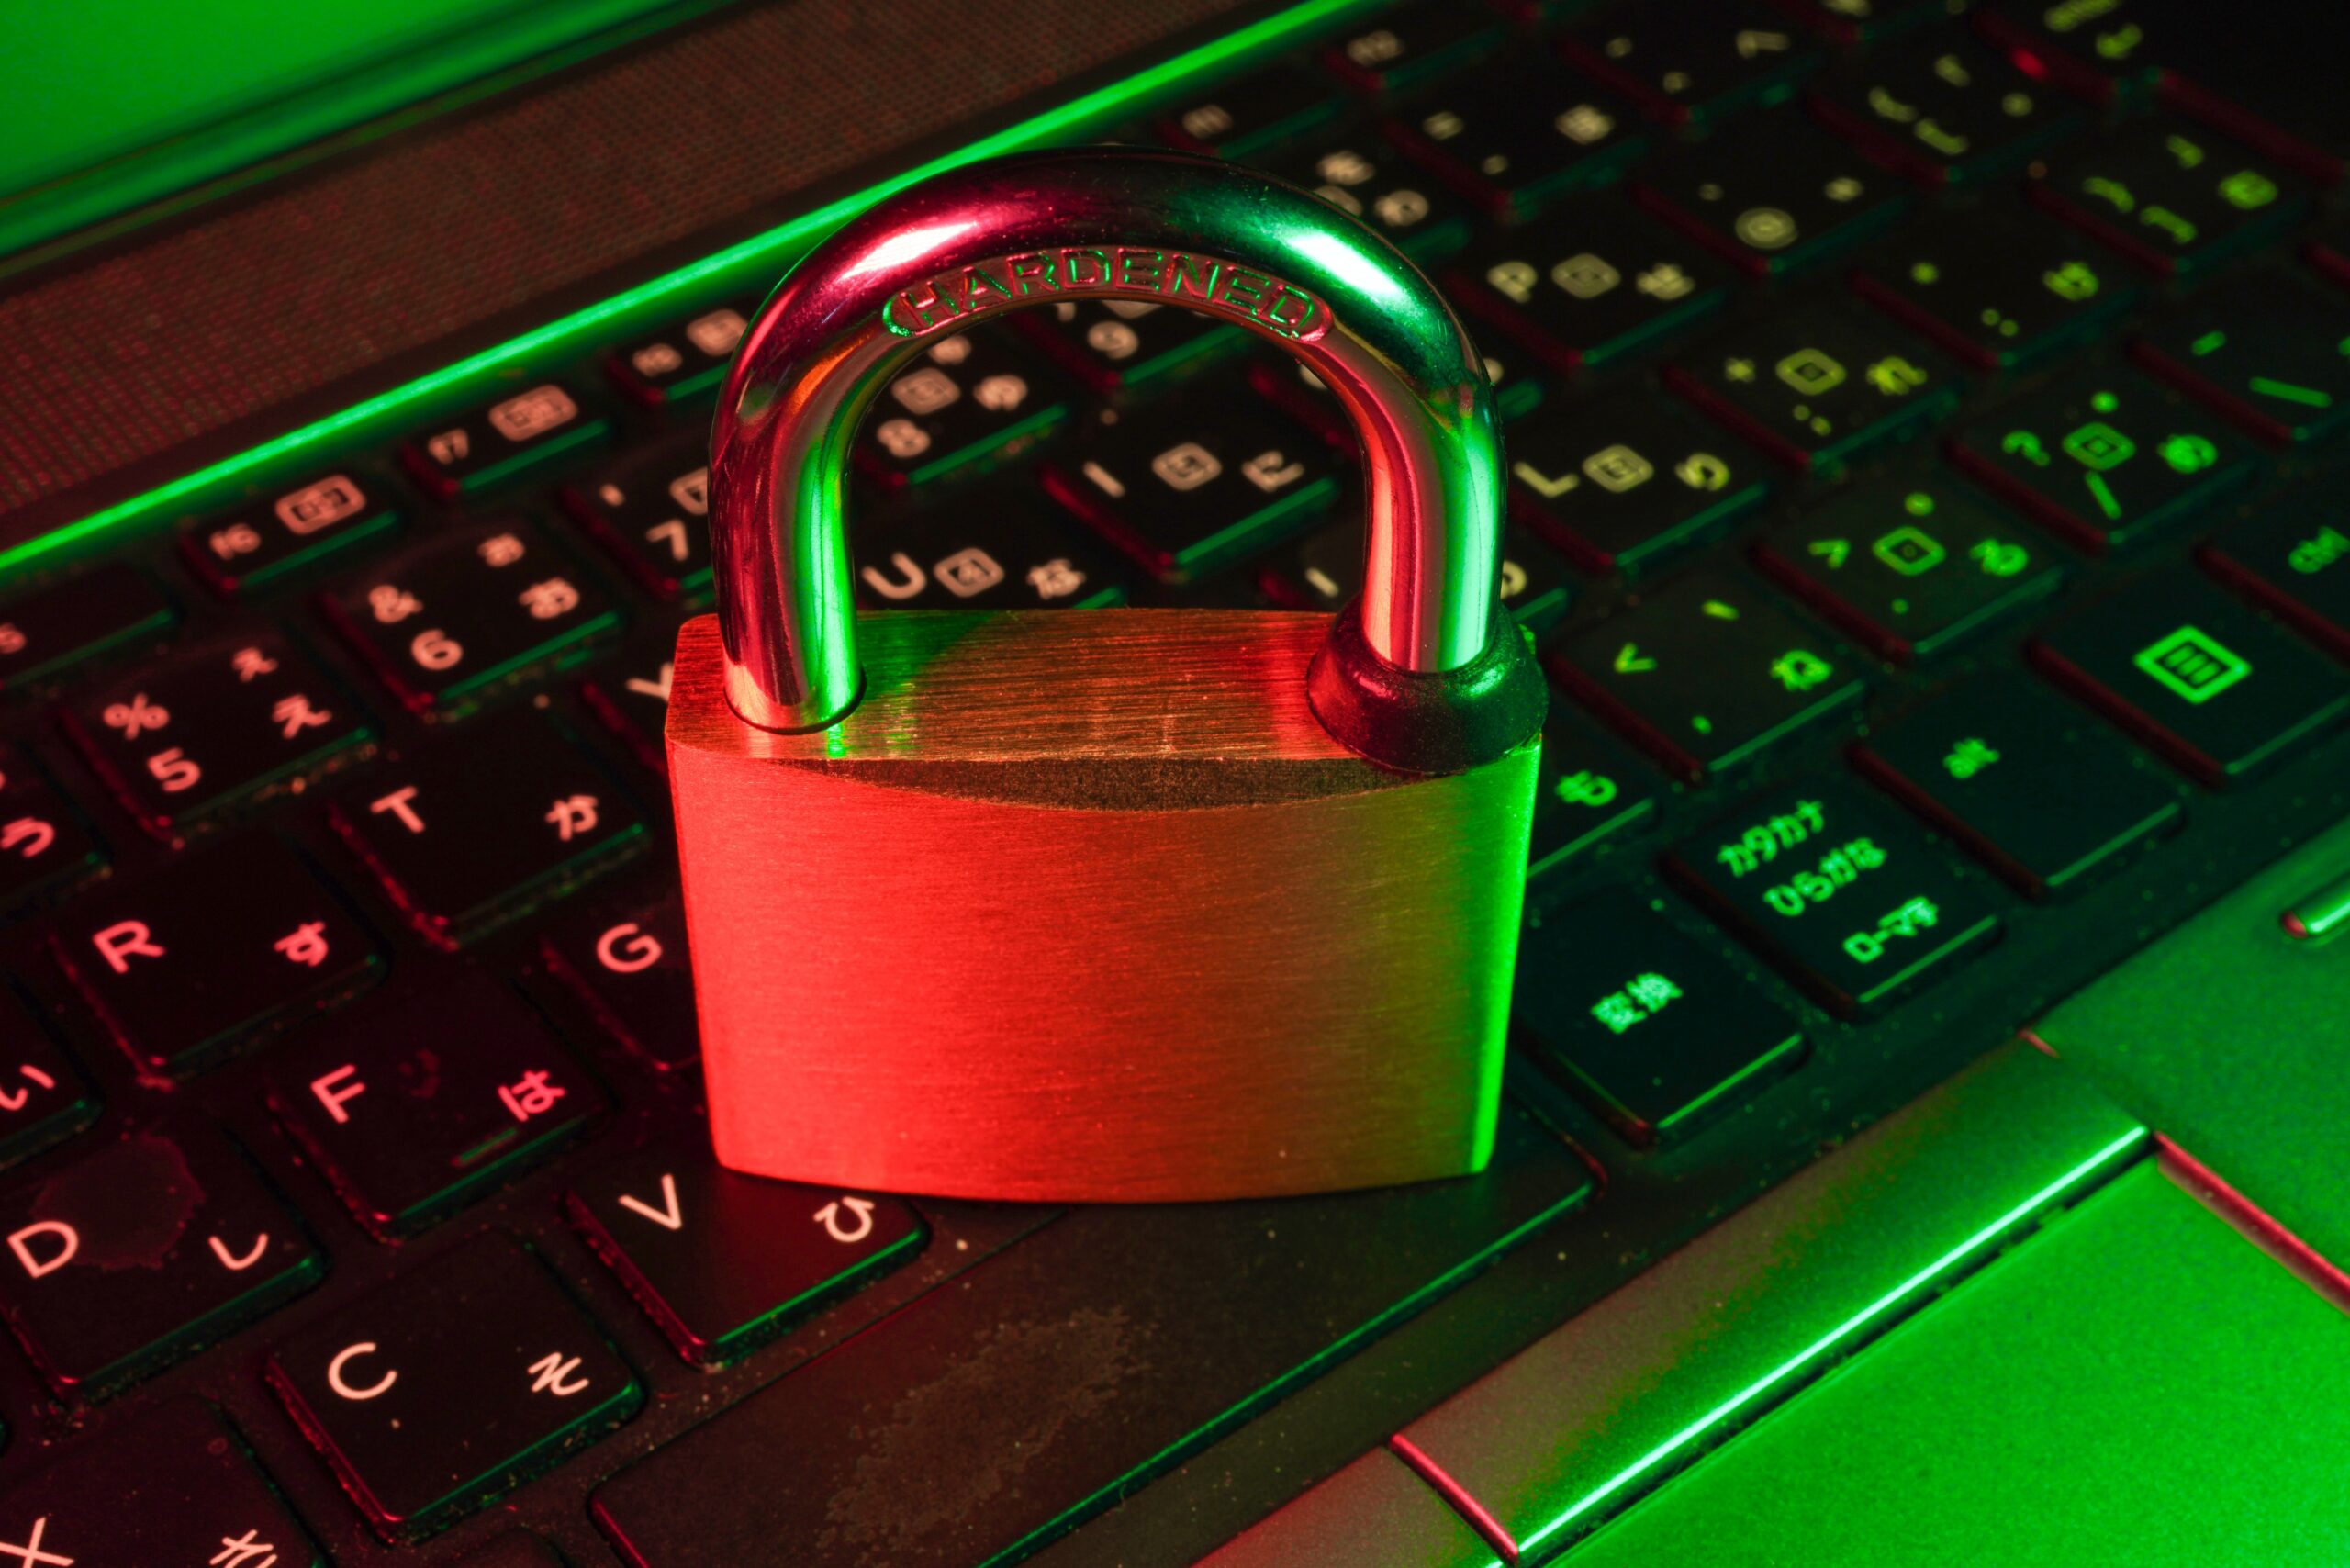 pad lock on a keyboard with red and green lighting